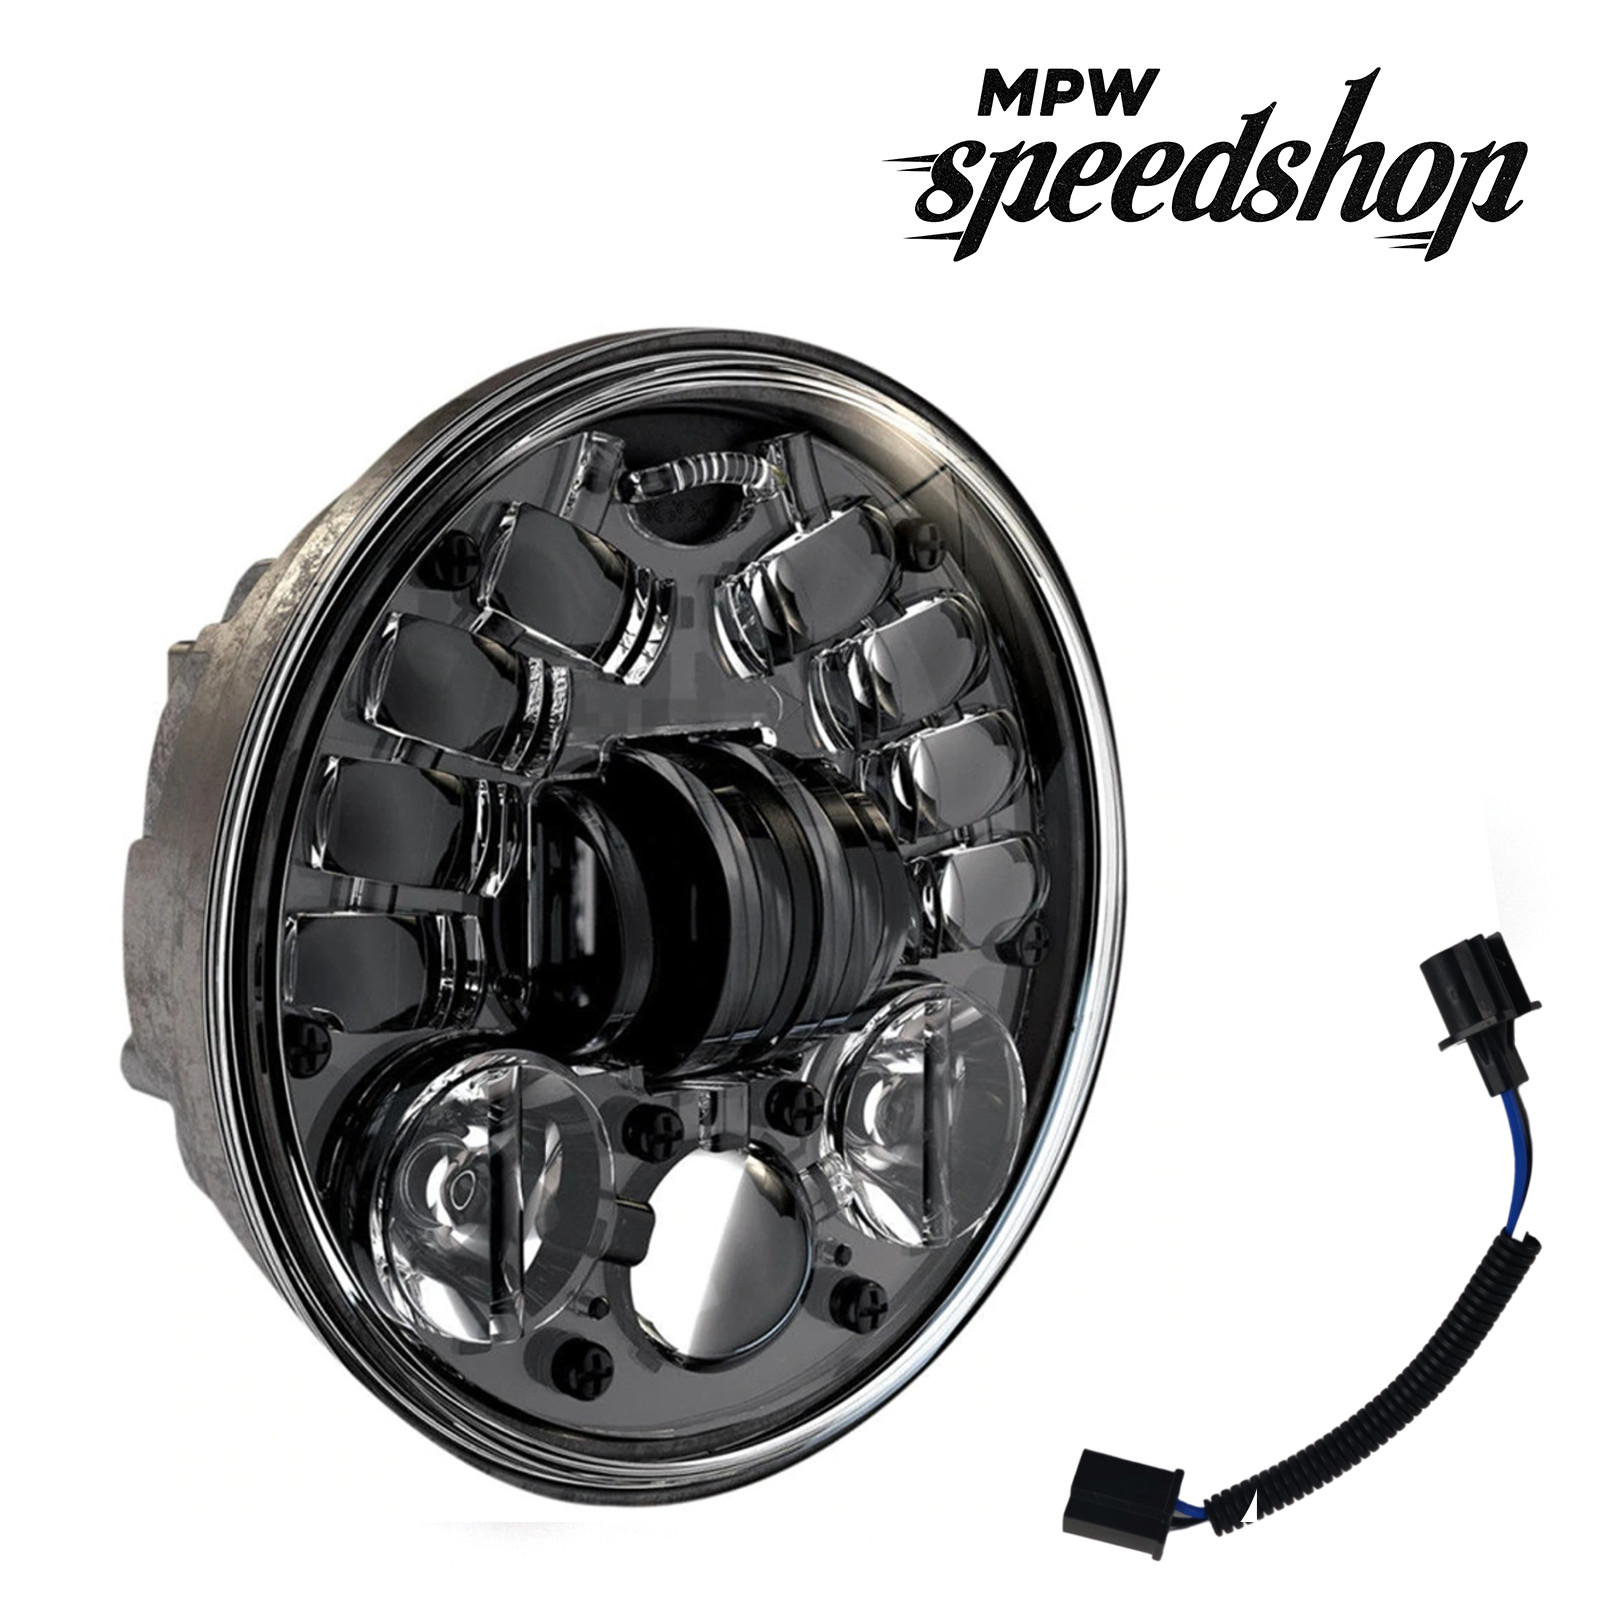 5-3/45.75inch LED Hi/Lo Headlight for Harley Motorcycle Projector Lamp